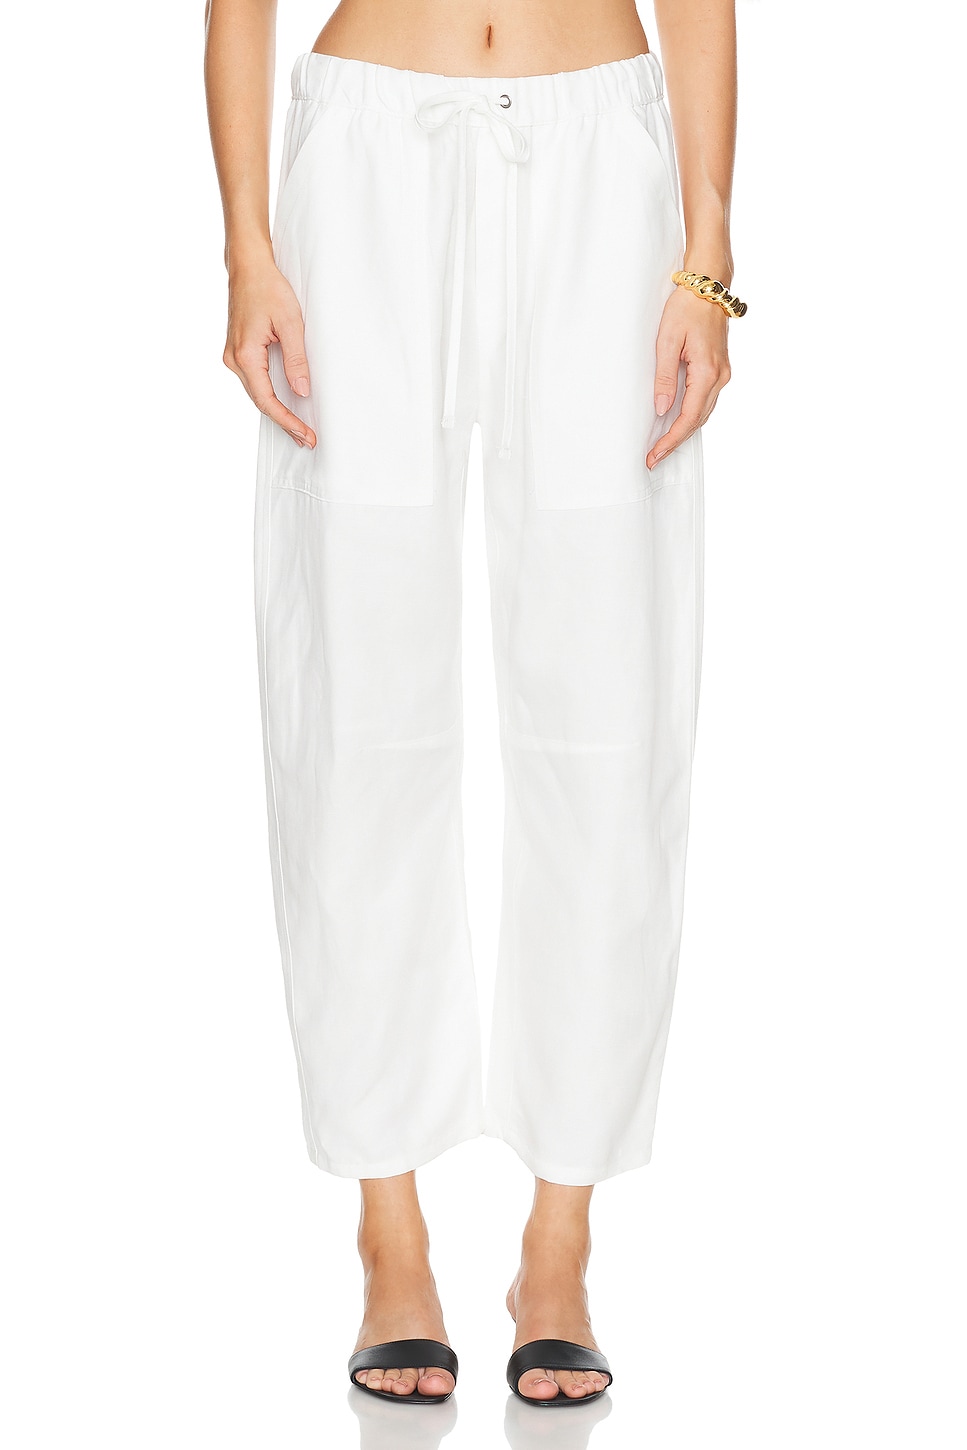 Image 1 of Enza Costa Twill Utility Pant in Off White